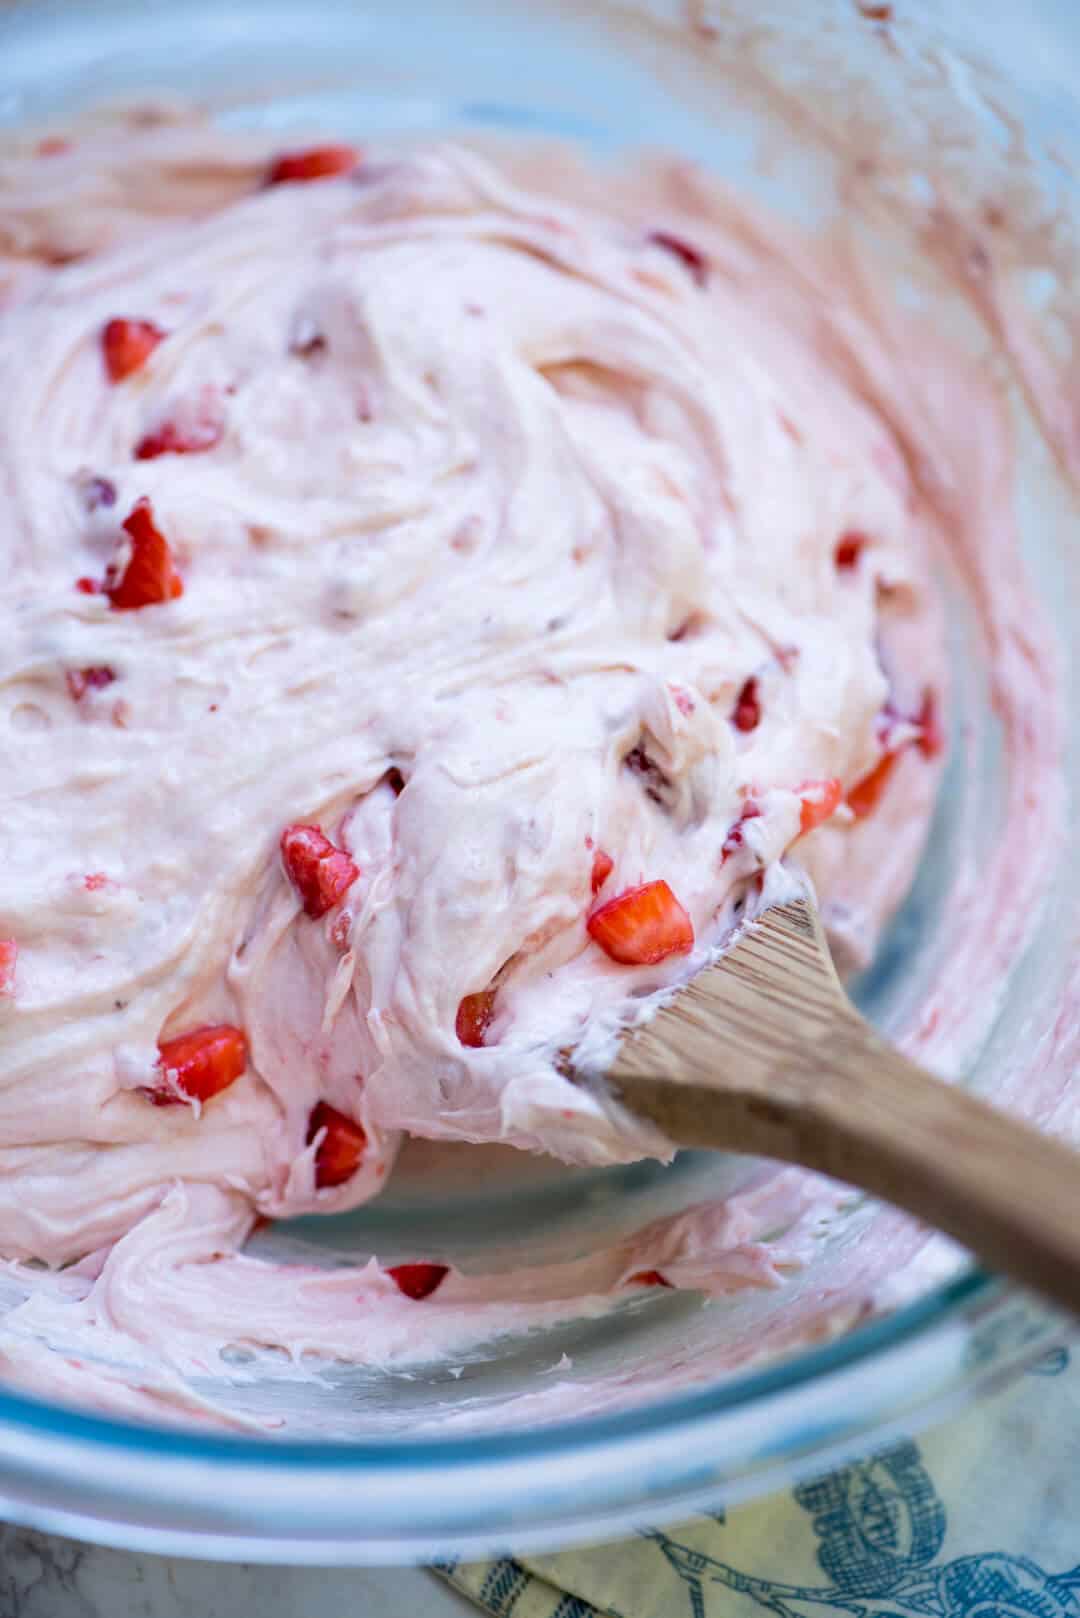 A wooden spoon stirs fresh strawberries into buttercream frosting.